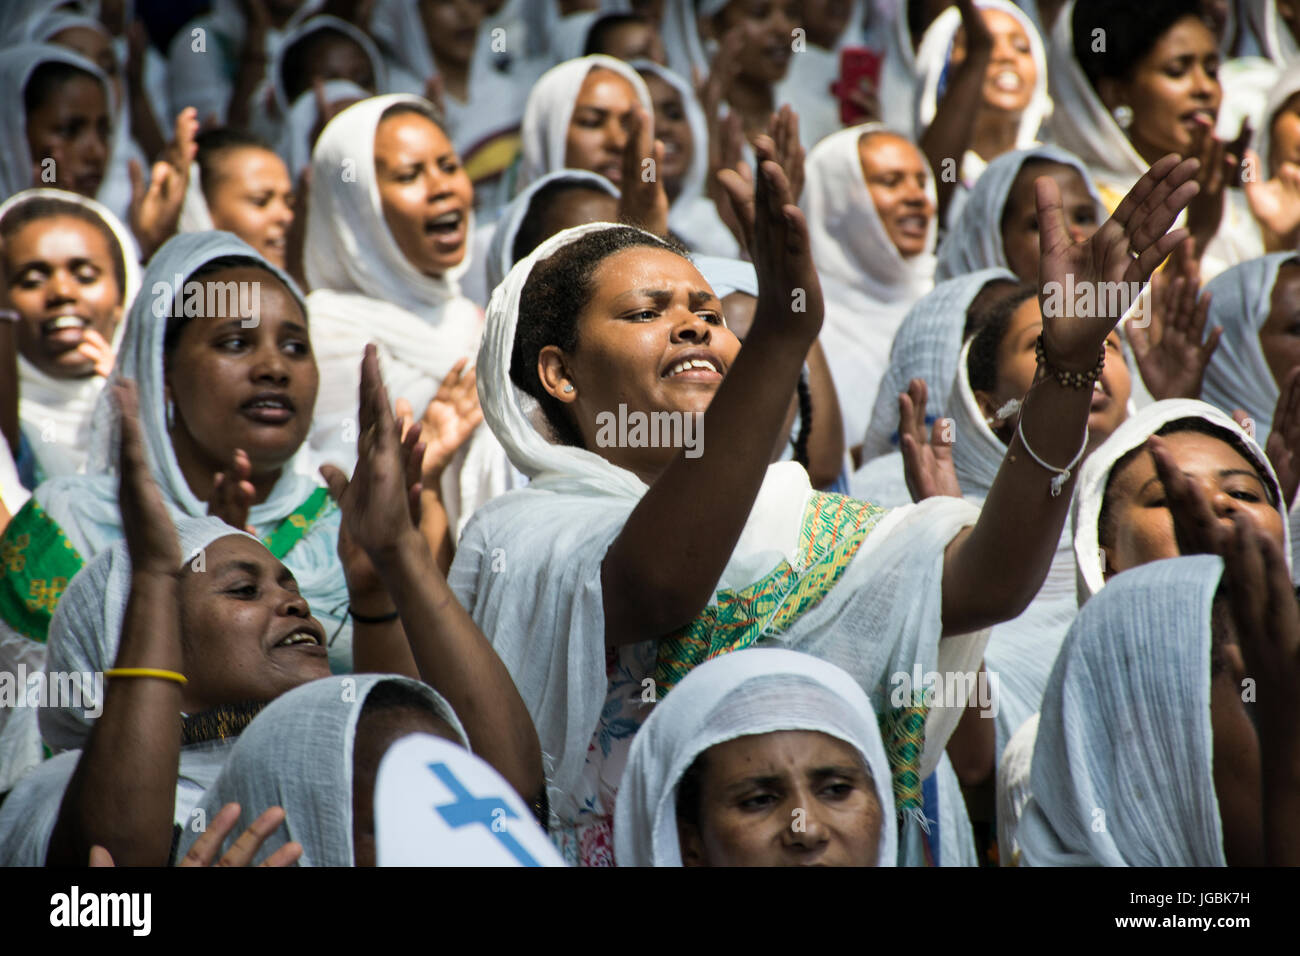 Ethiopian Orthodox Christian women during the St Yared day service inside Our Lady of Lebanon Church Harissa Lebanon. Stock Photo